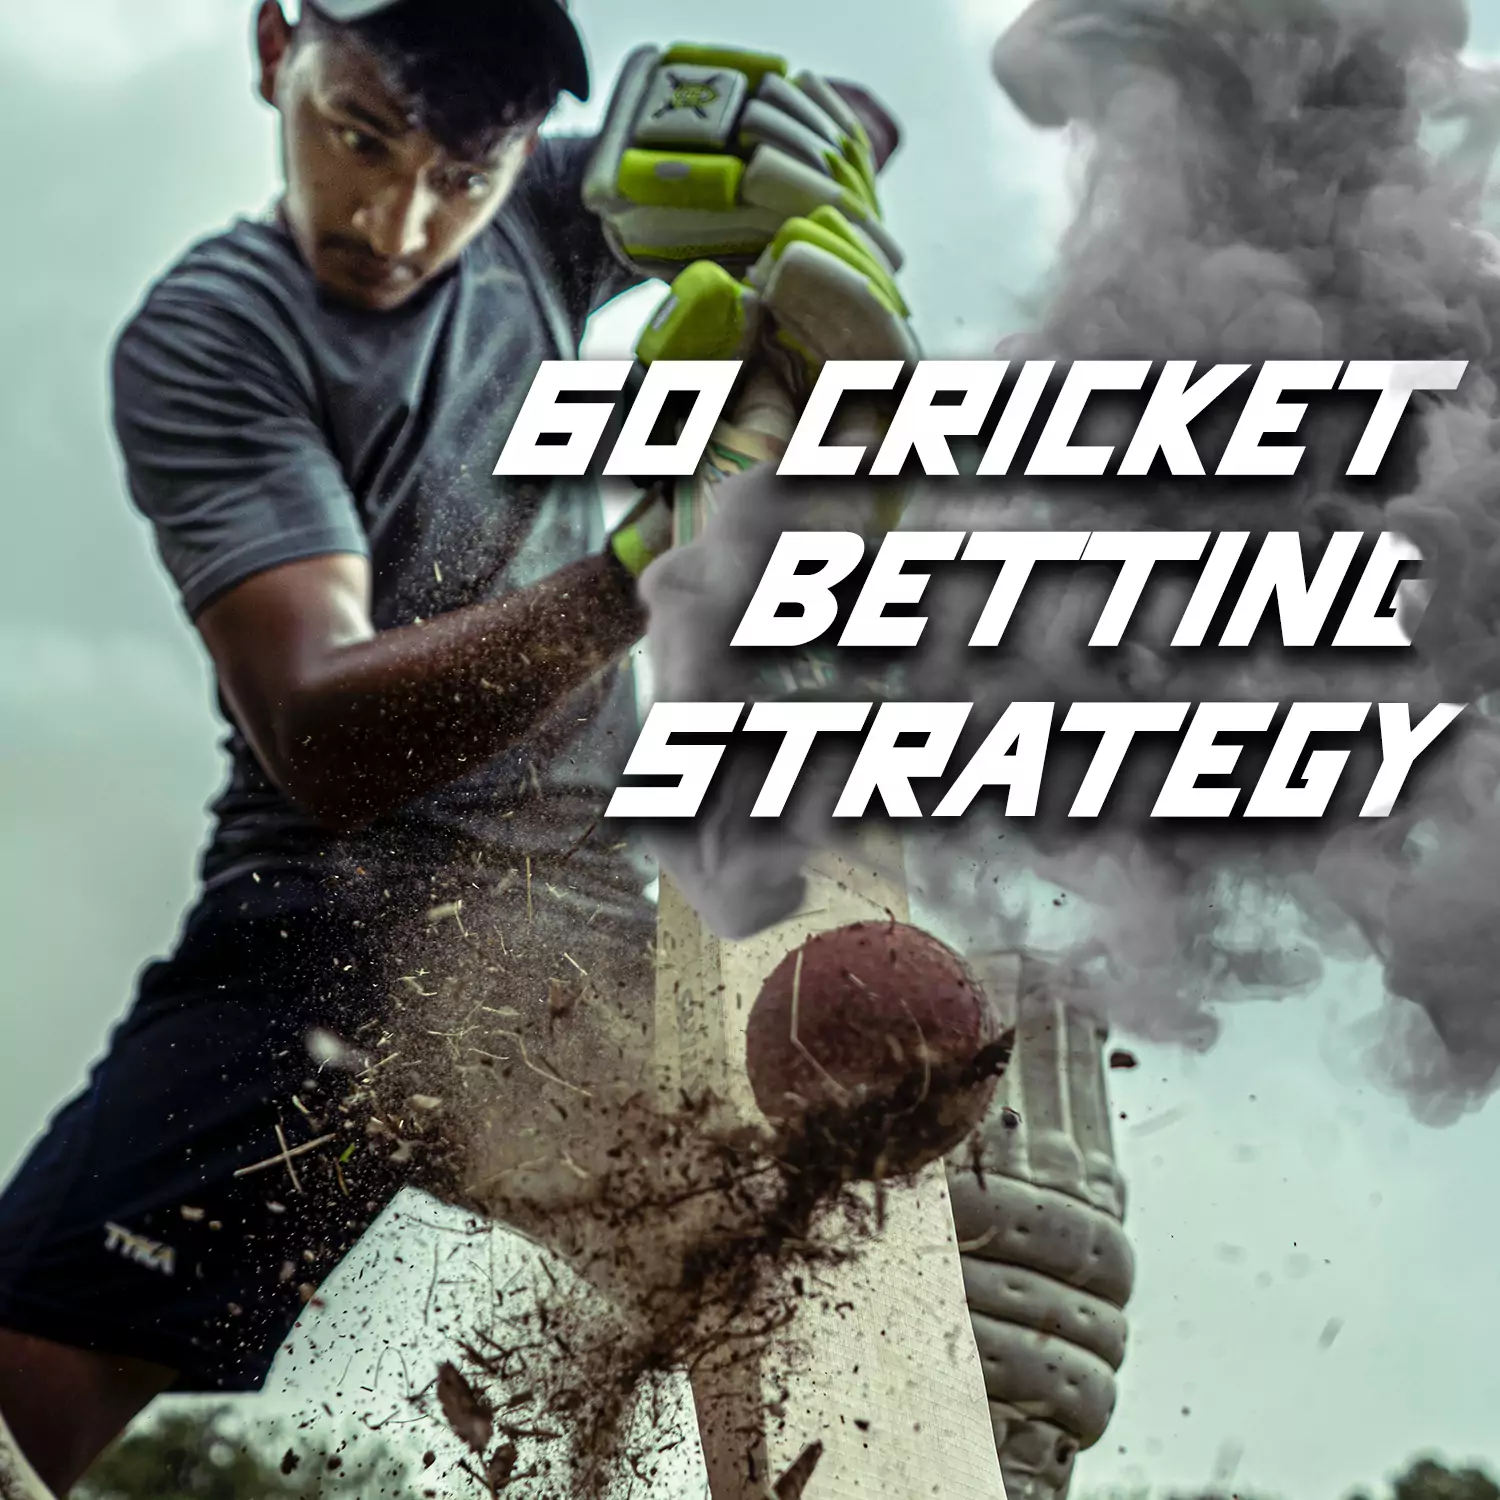 +60% cricket betting strategy is the most popular in terms of long-term profitability.